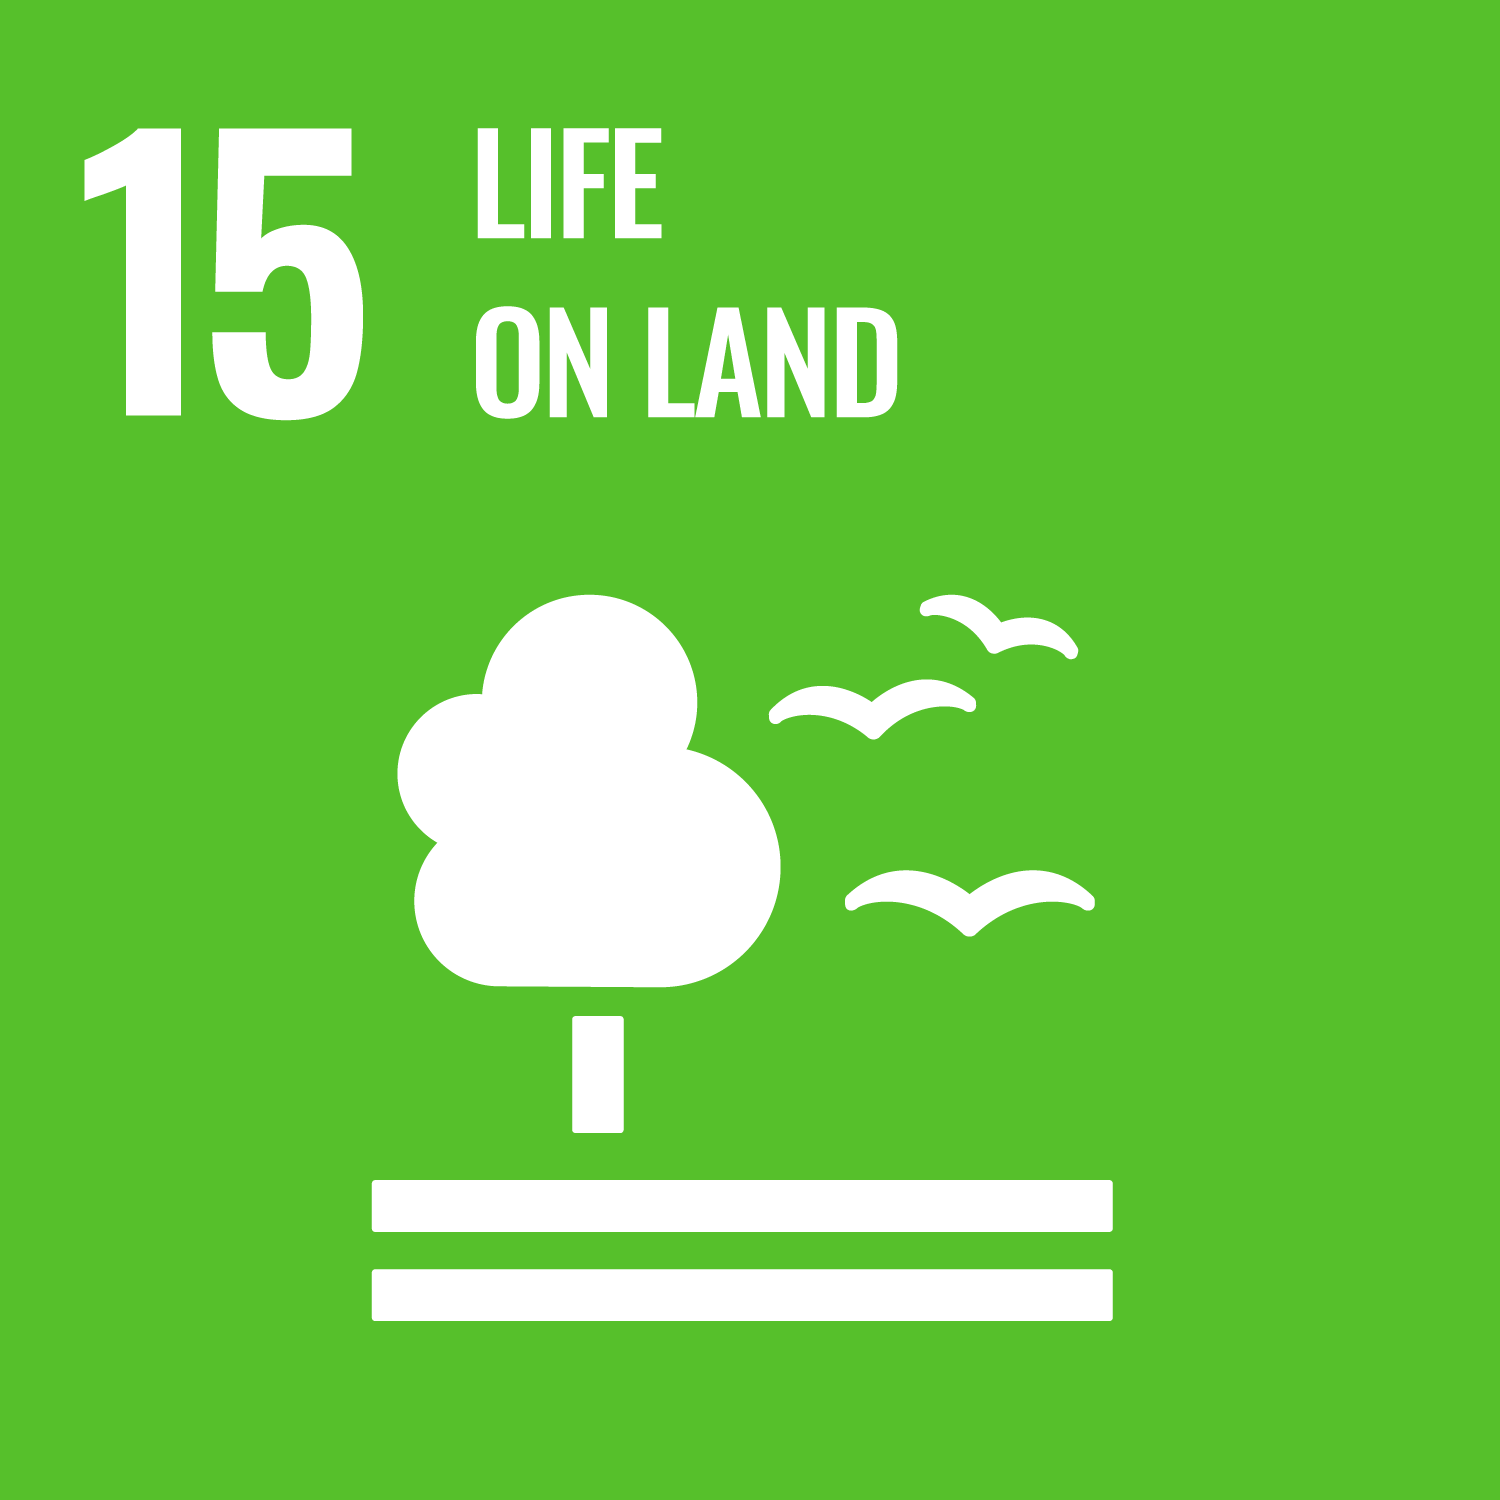 Graphic for SDG15 Life on Land